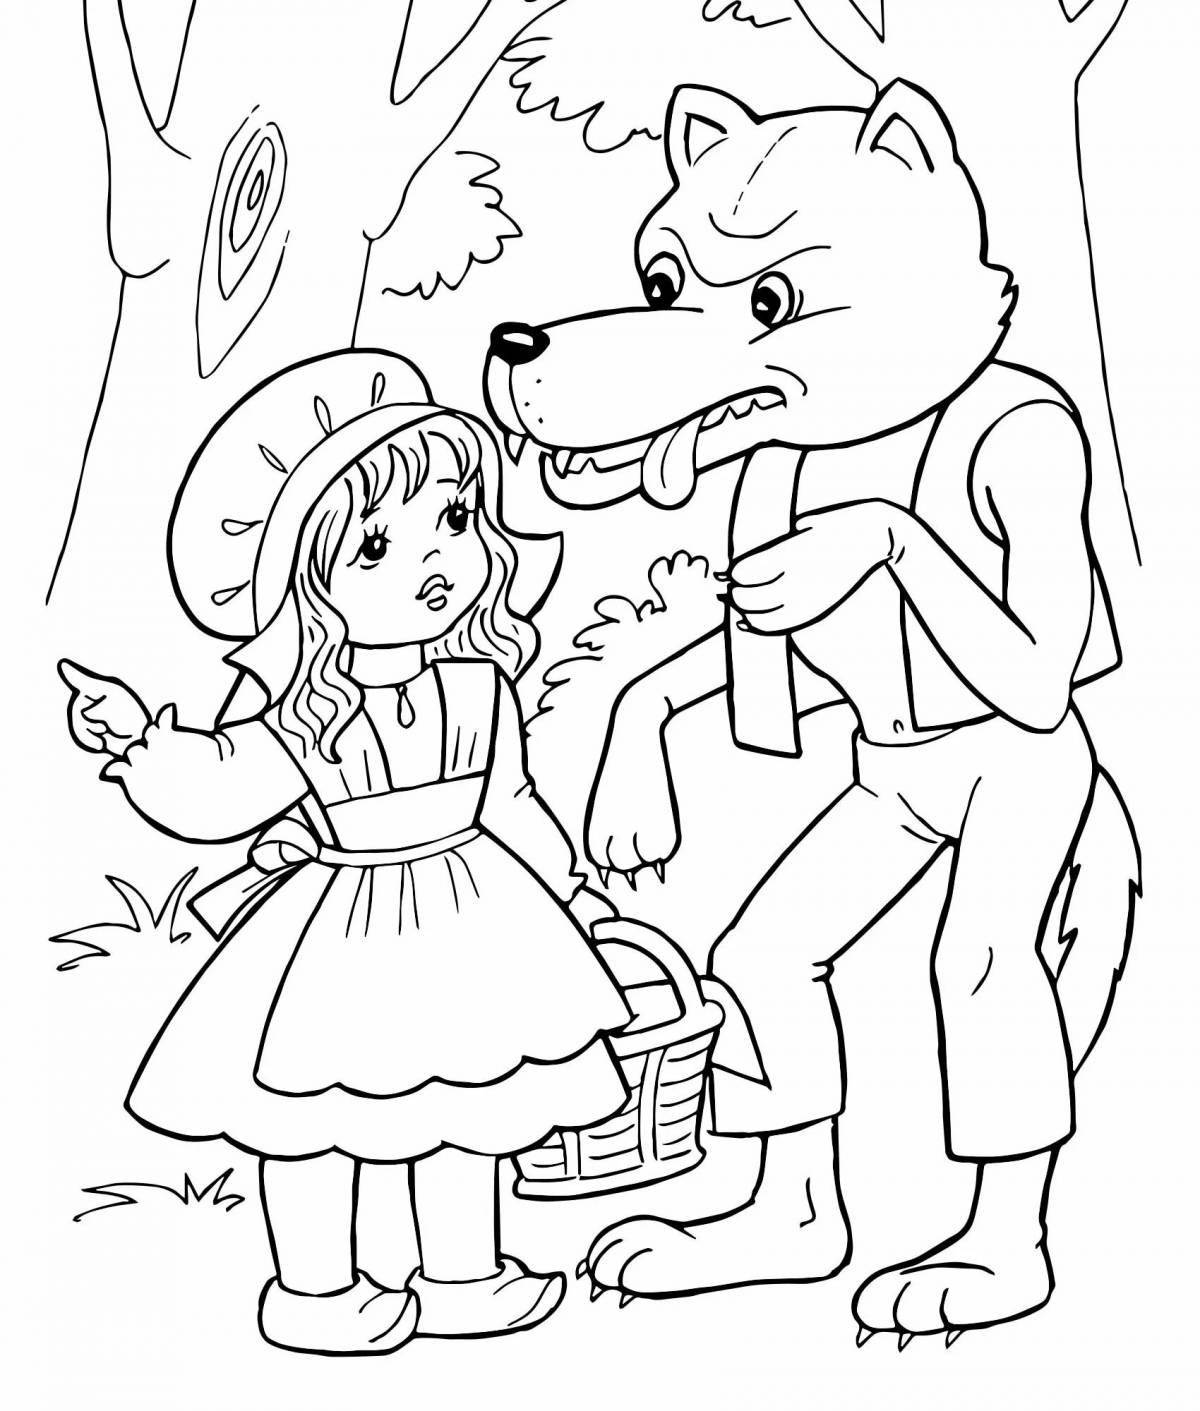 Rampant gray wolf and little red riding hood coloring page